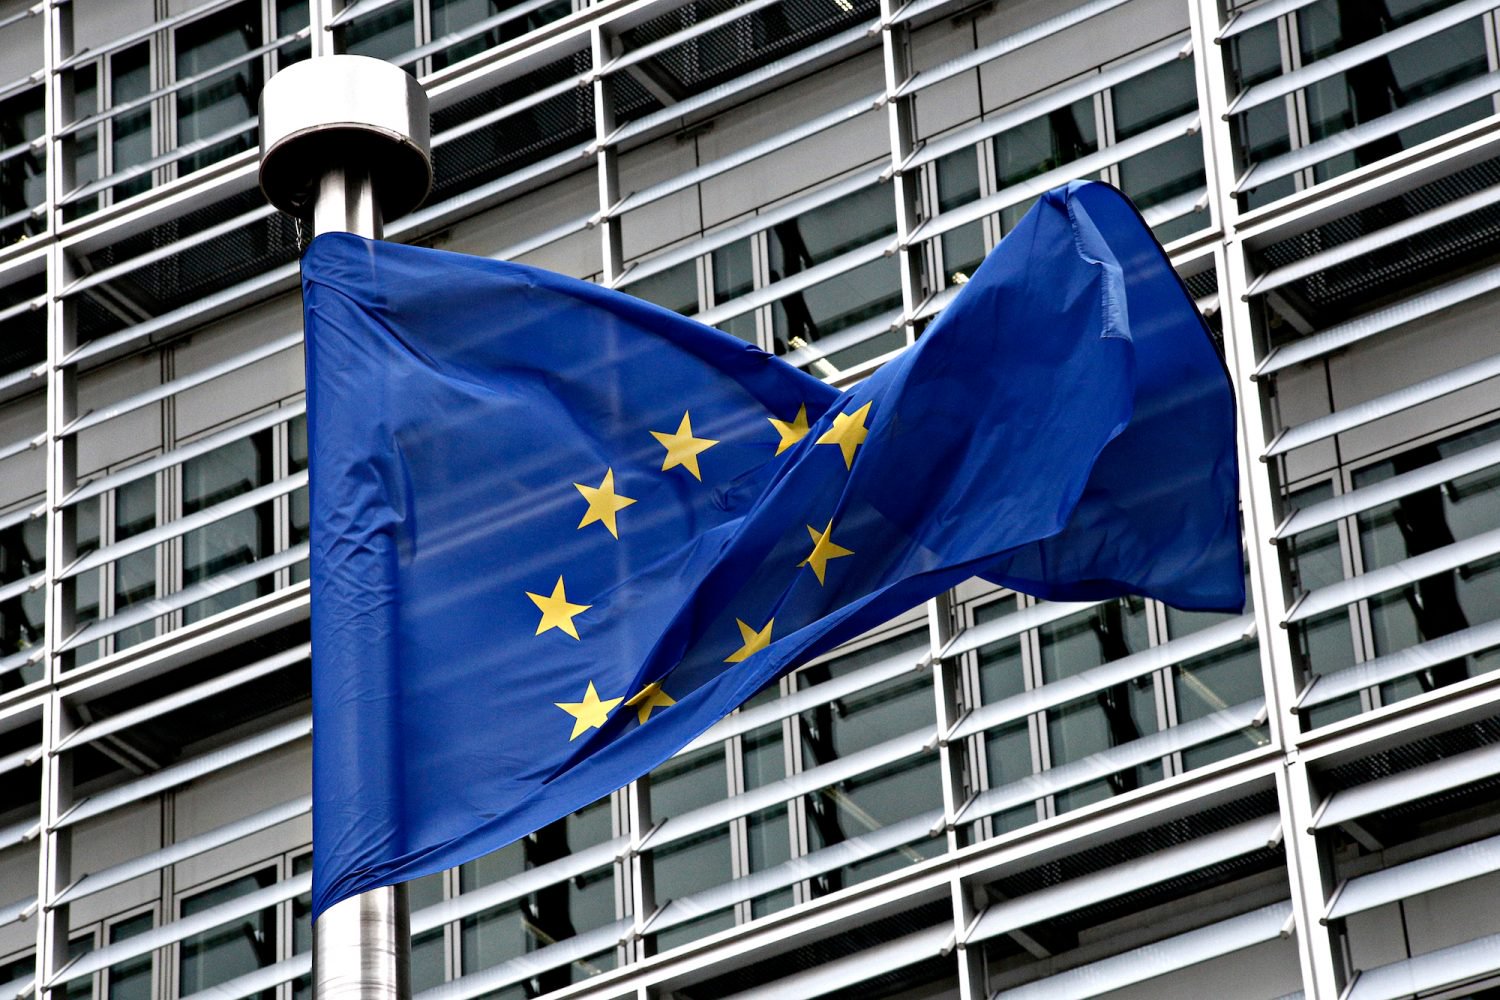 ‘Crypto Assets Are Here To Stay,’ Says EU Commission Vice President